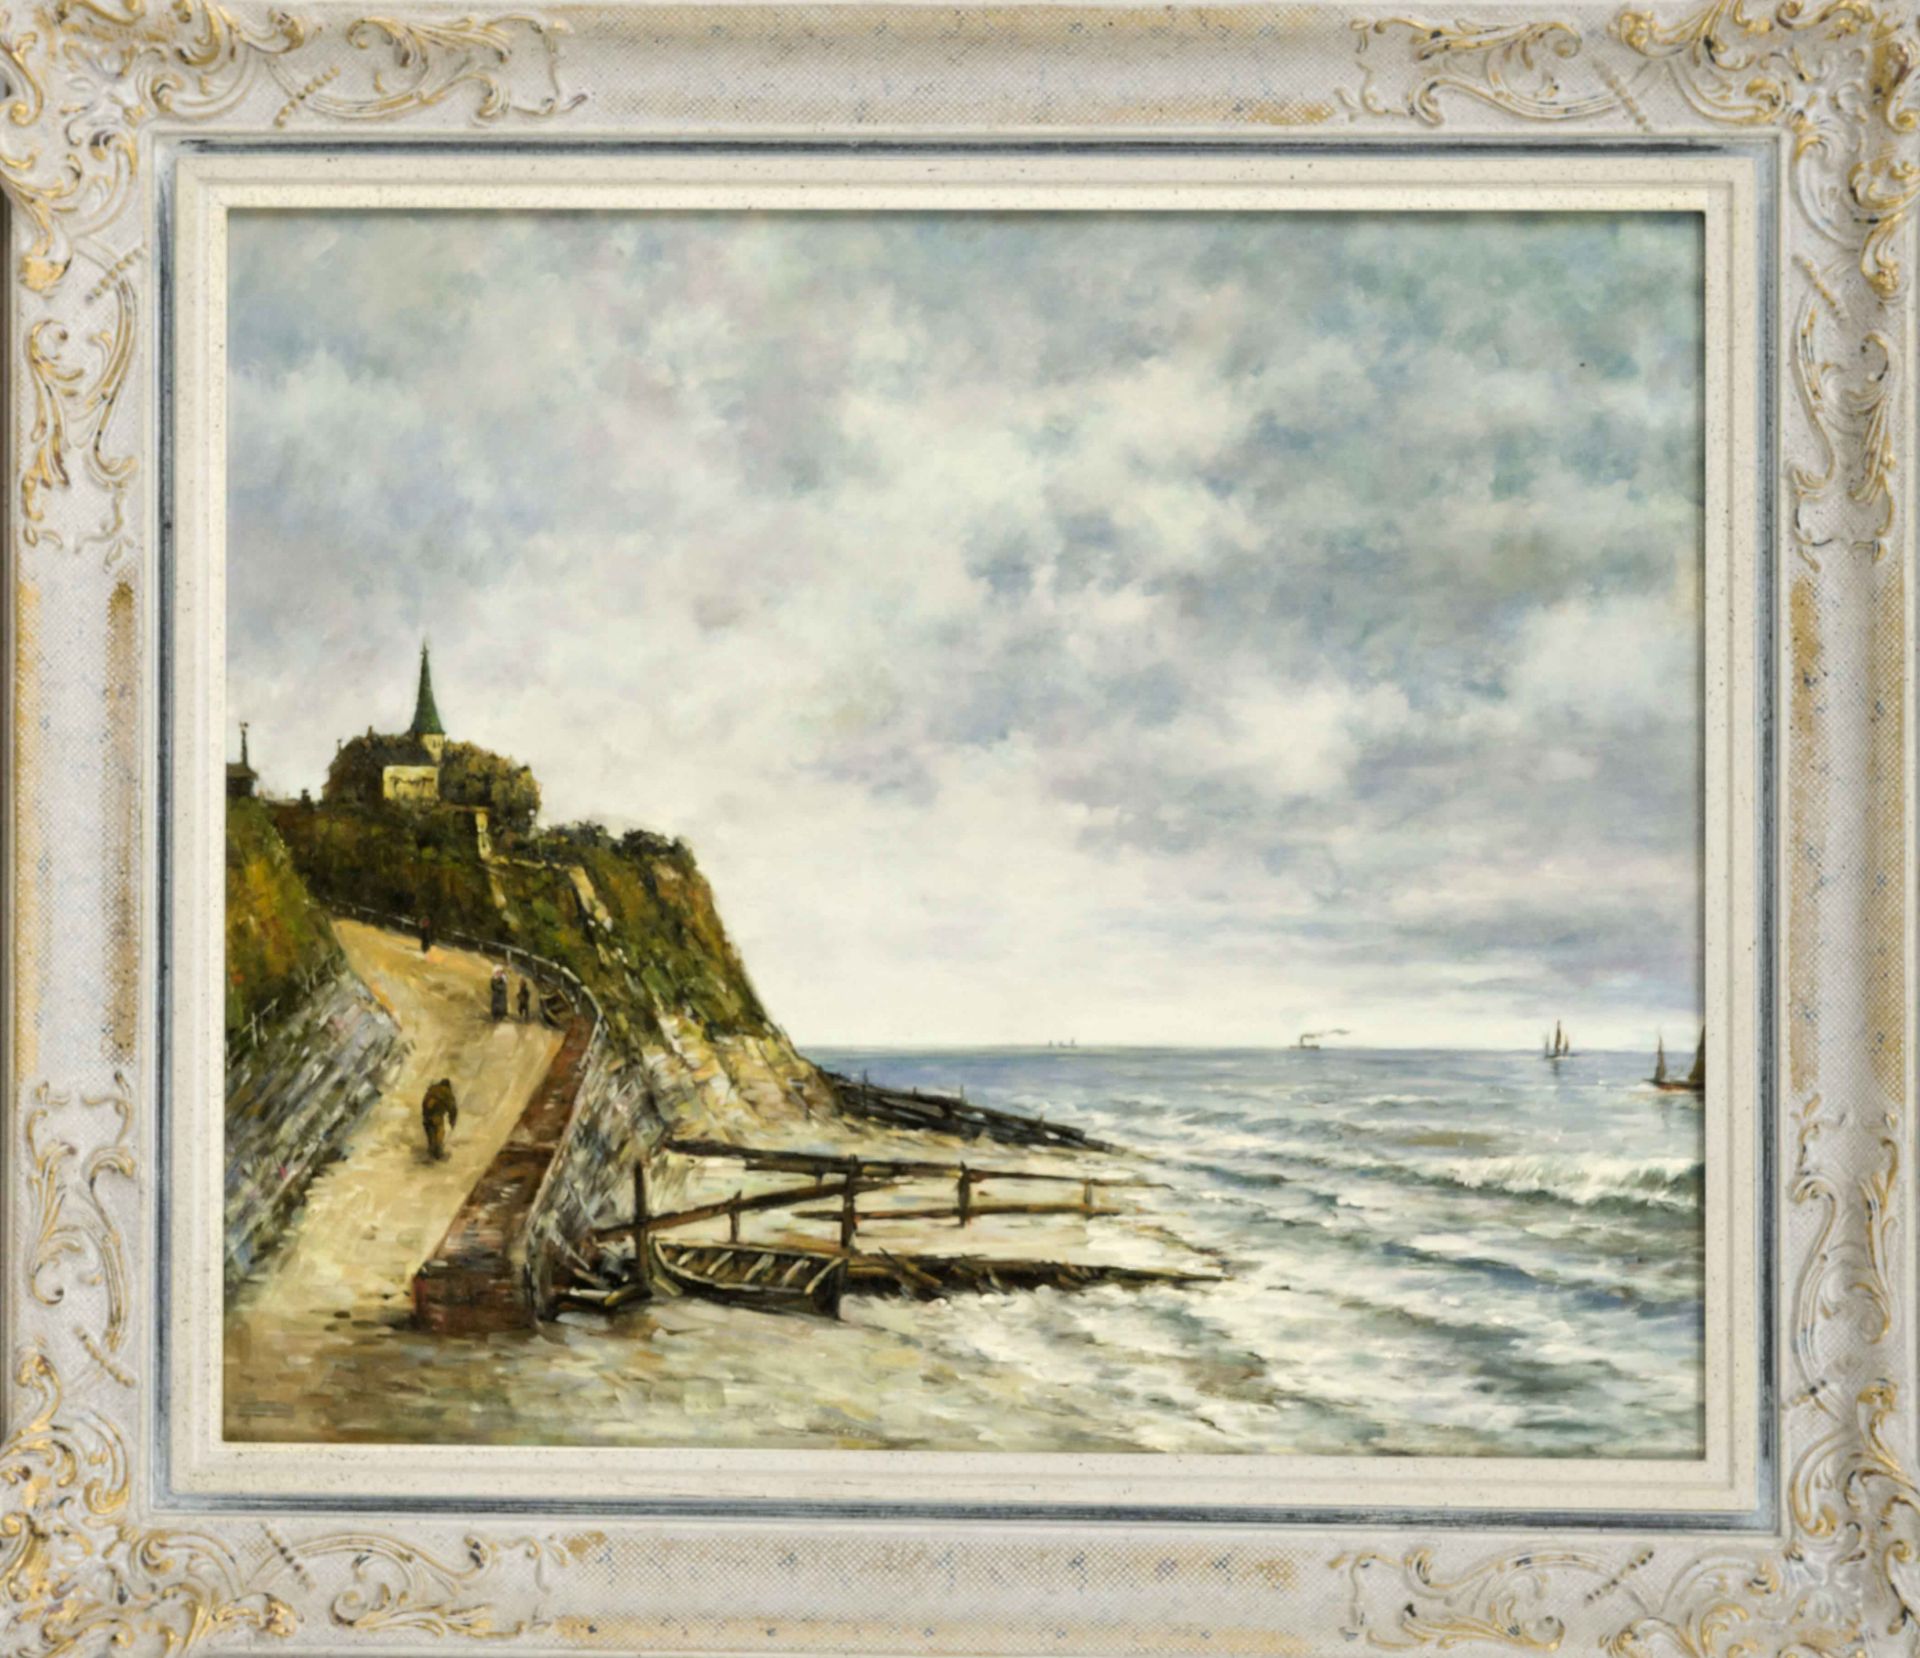 Anonymous painter of the 21st century, Breton coastal landscape in the style of the turn of the